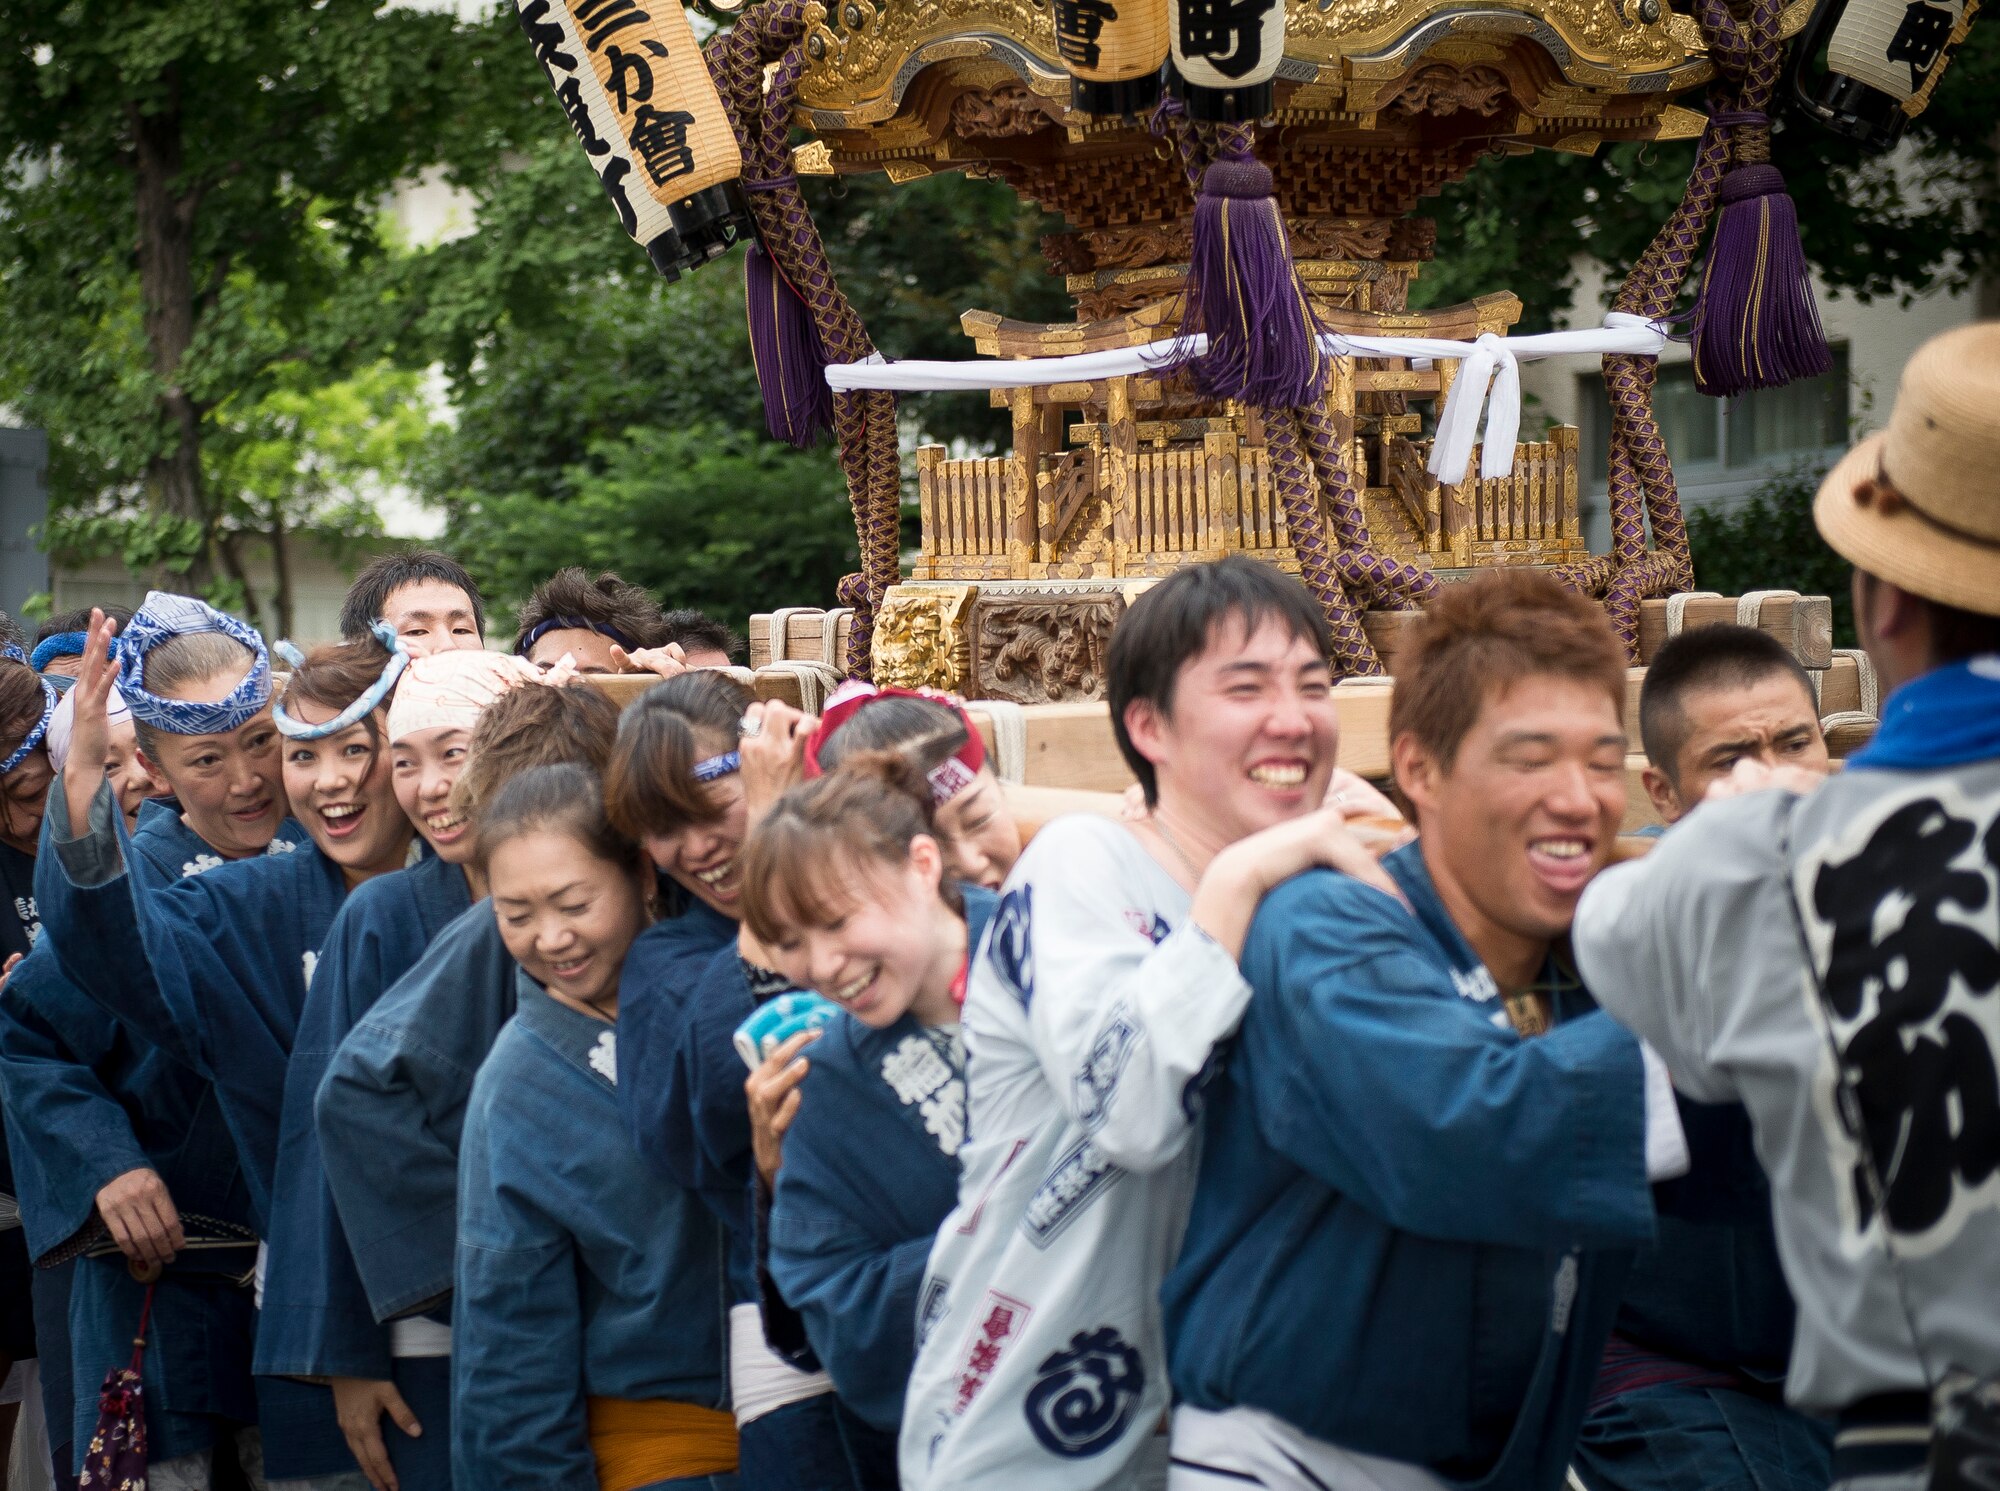 Local residents carry a mikoshi shrine in Fussa City, Japan, Aug. 8, 2013, during the 64th annual Fussa Tanabata Festival. The festival included traditional Japanese dance performances and groups carrying mikoshi shrines from Shinmeisya Shrine to Fussa City Hall. (U.S. Air Force photo by Airman 1st Class Meagan Schutter/Released)